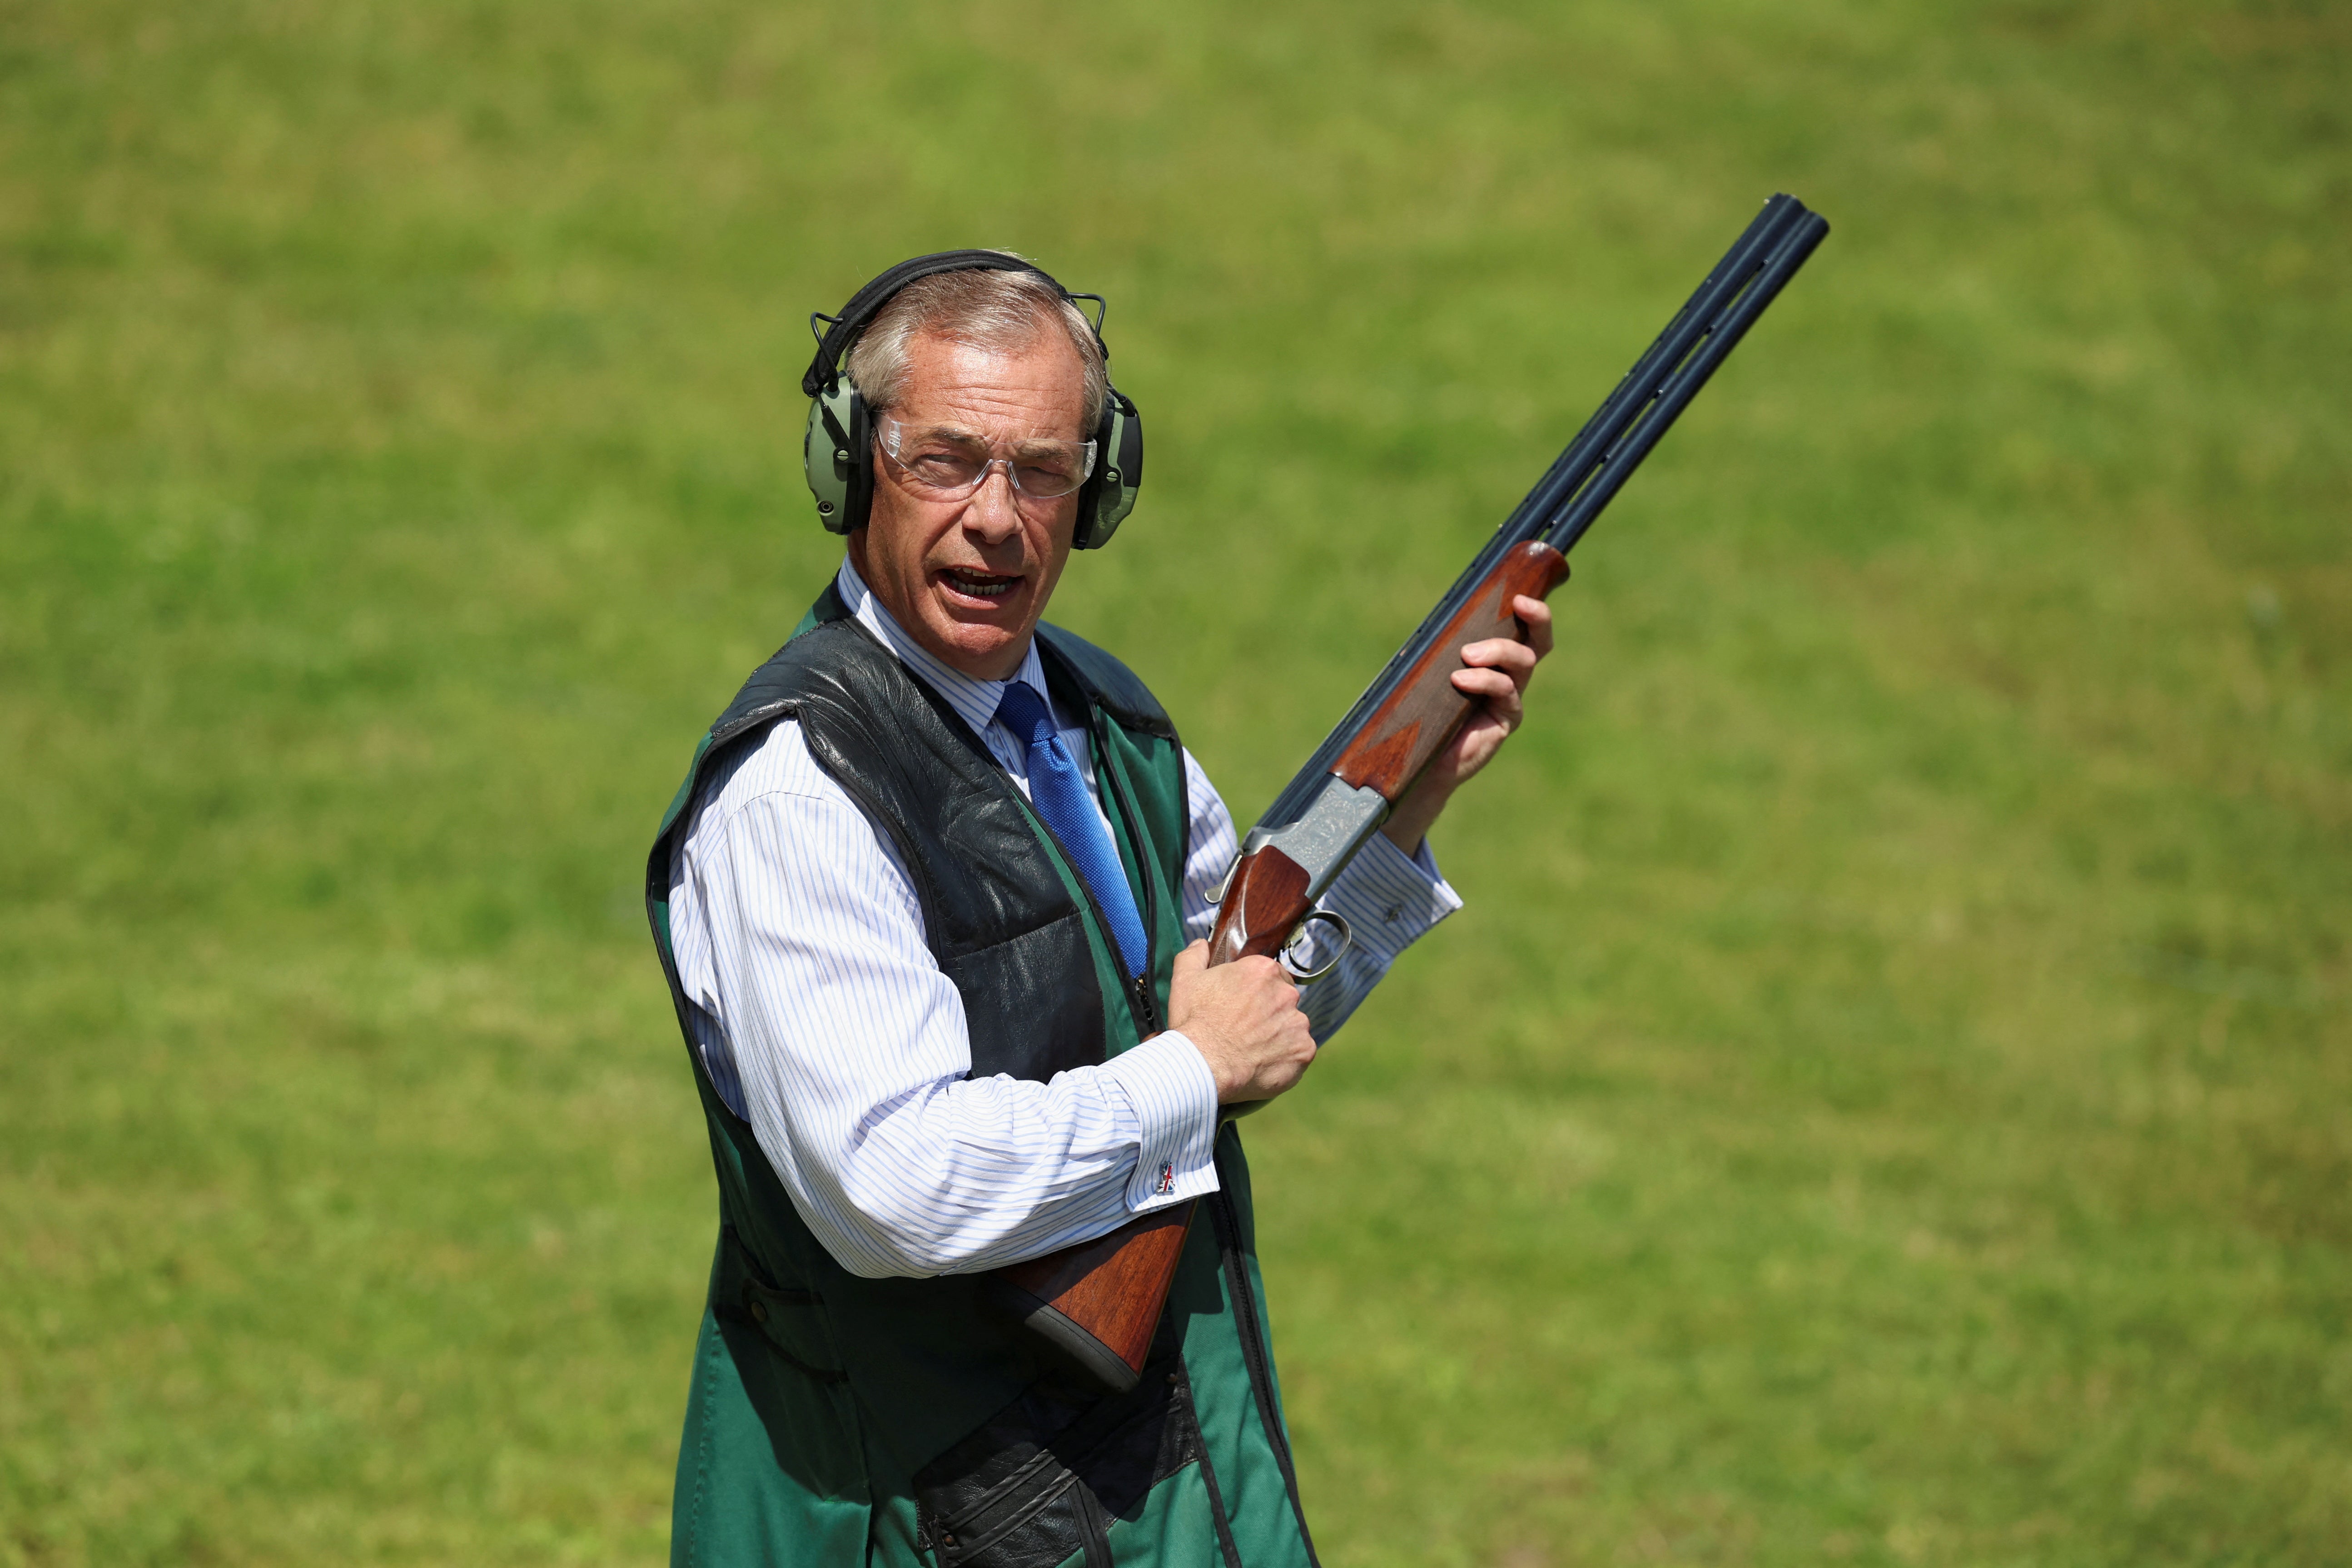 Farage has made support for country sports a major